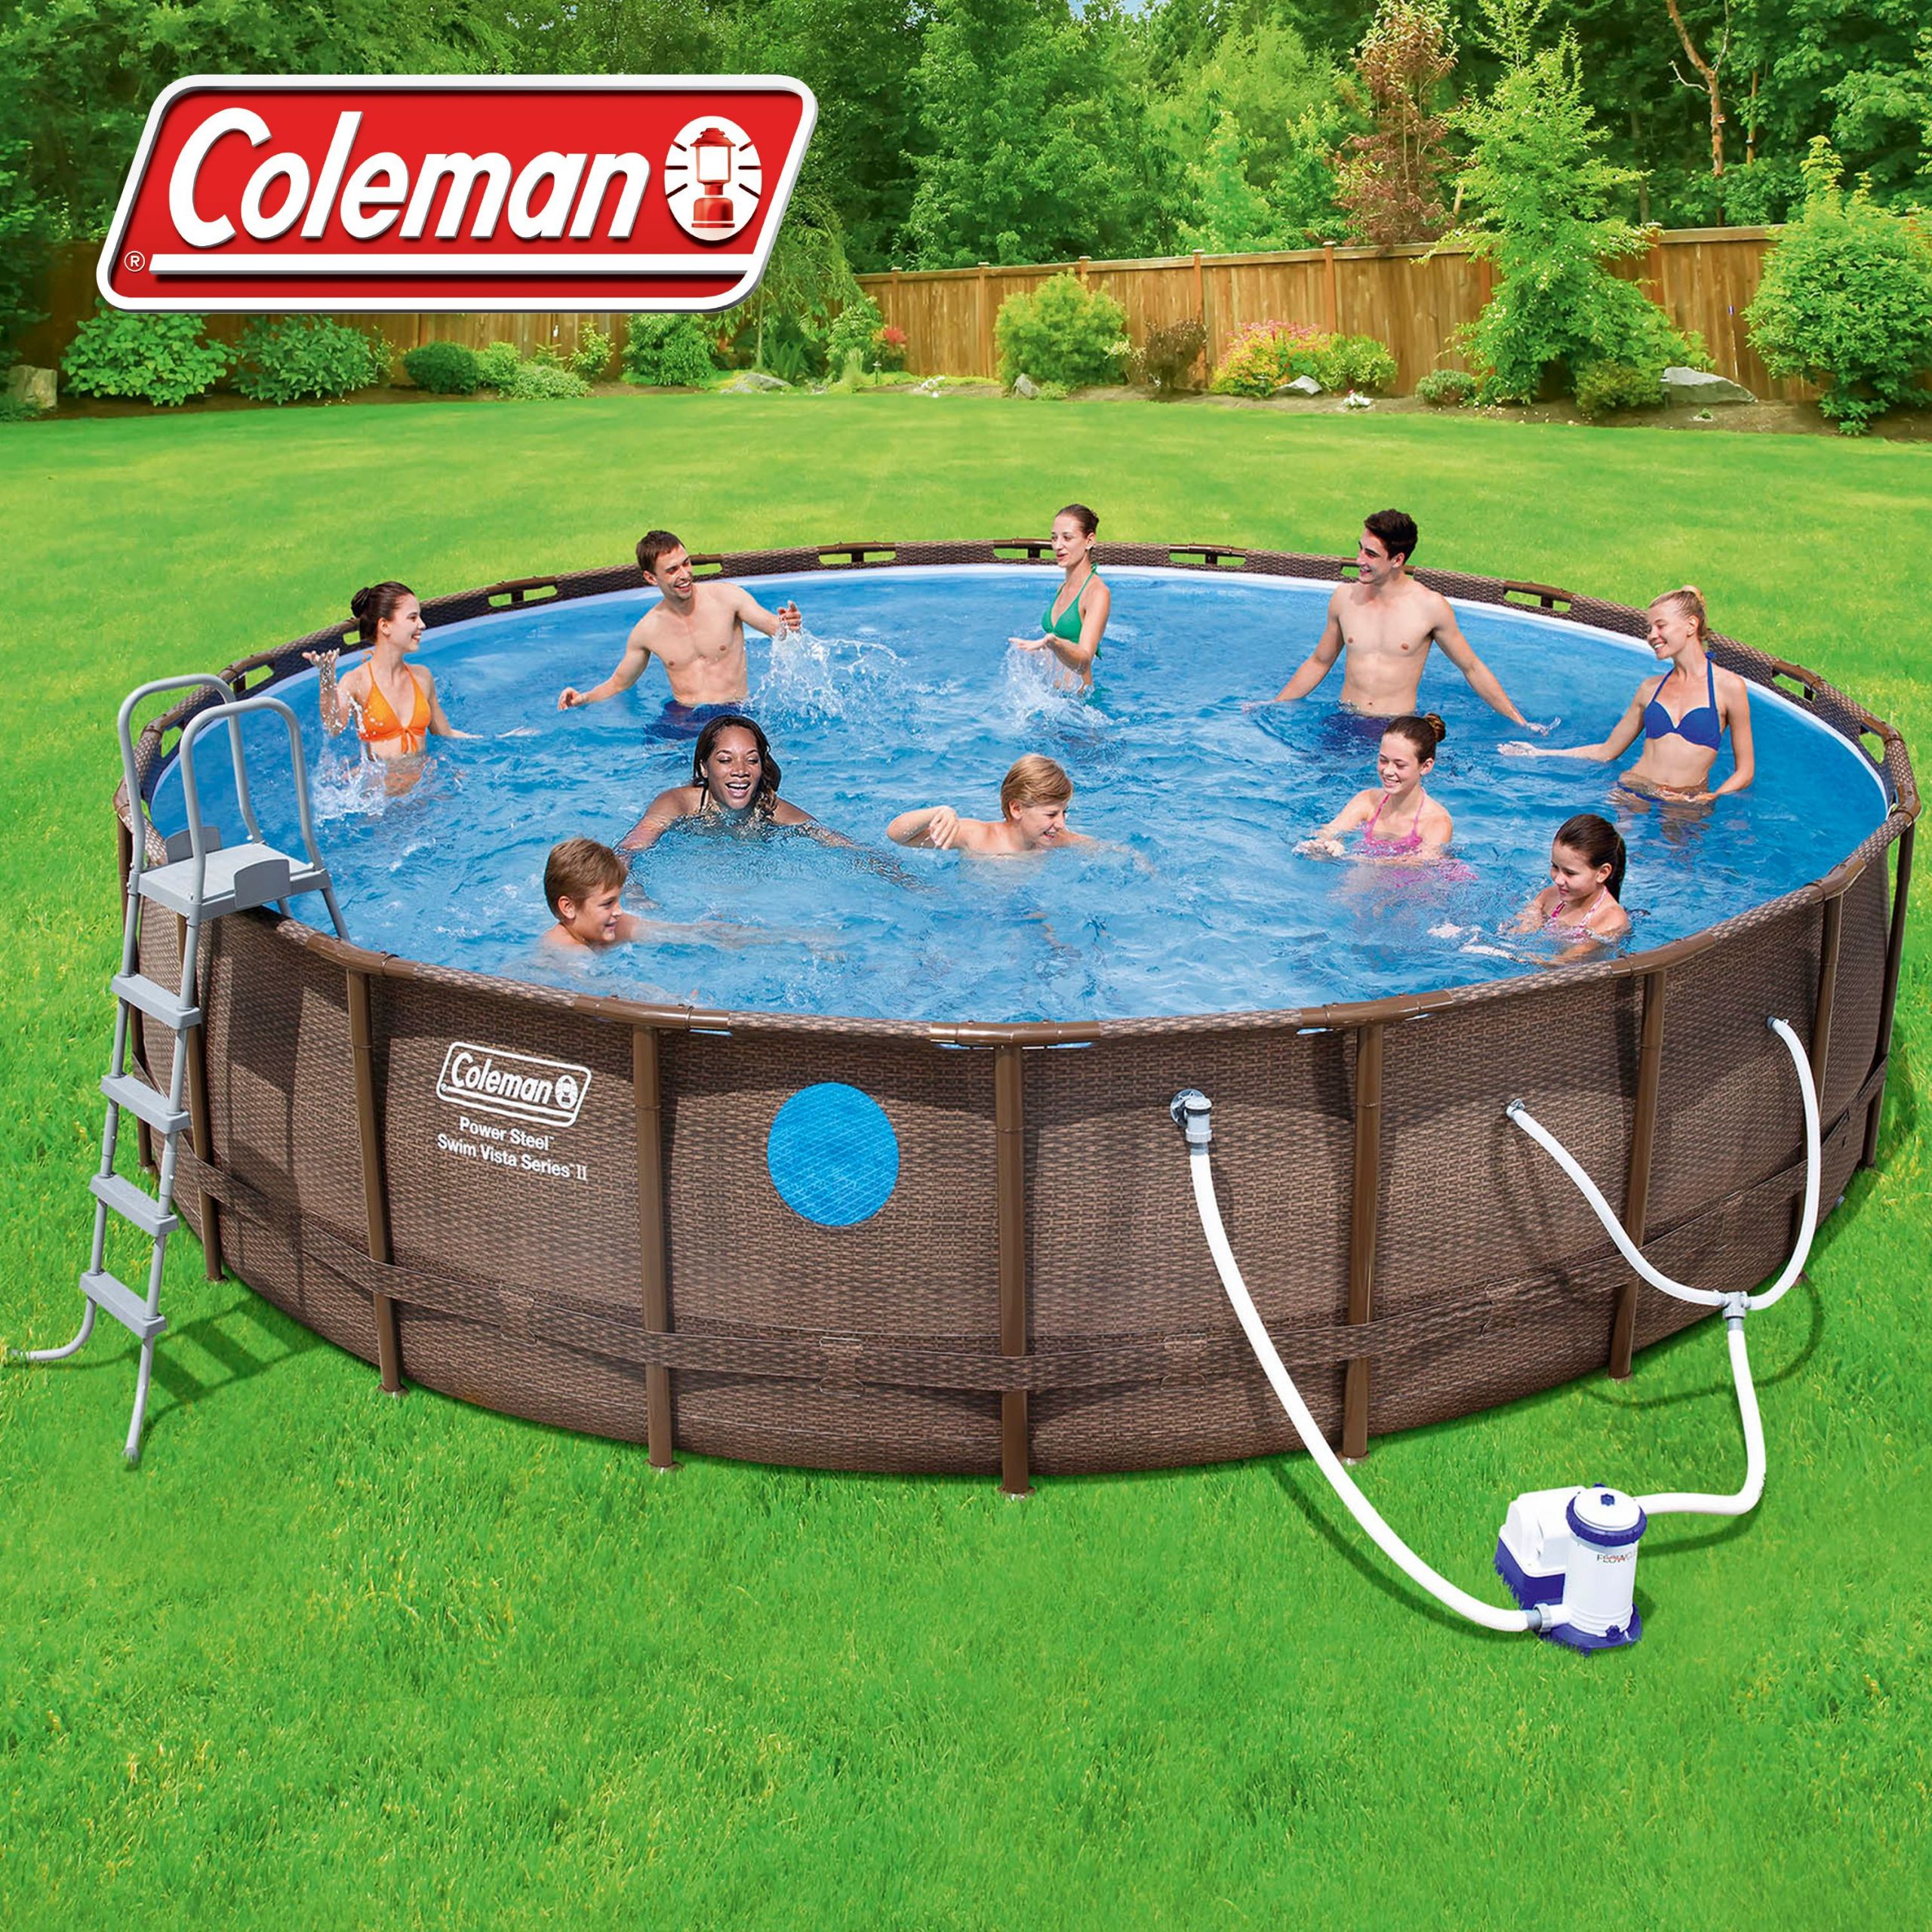 Coleman Above Ground Pool Skimmer
 Coleman Pool Drain Plug Adapter Best Drain s